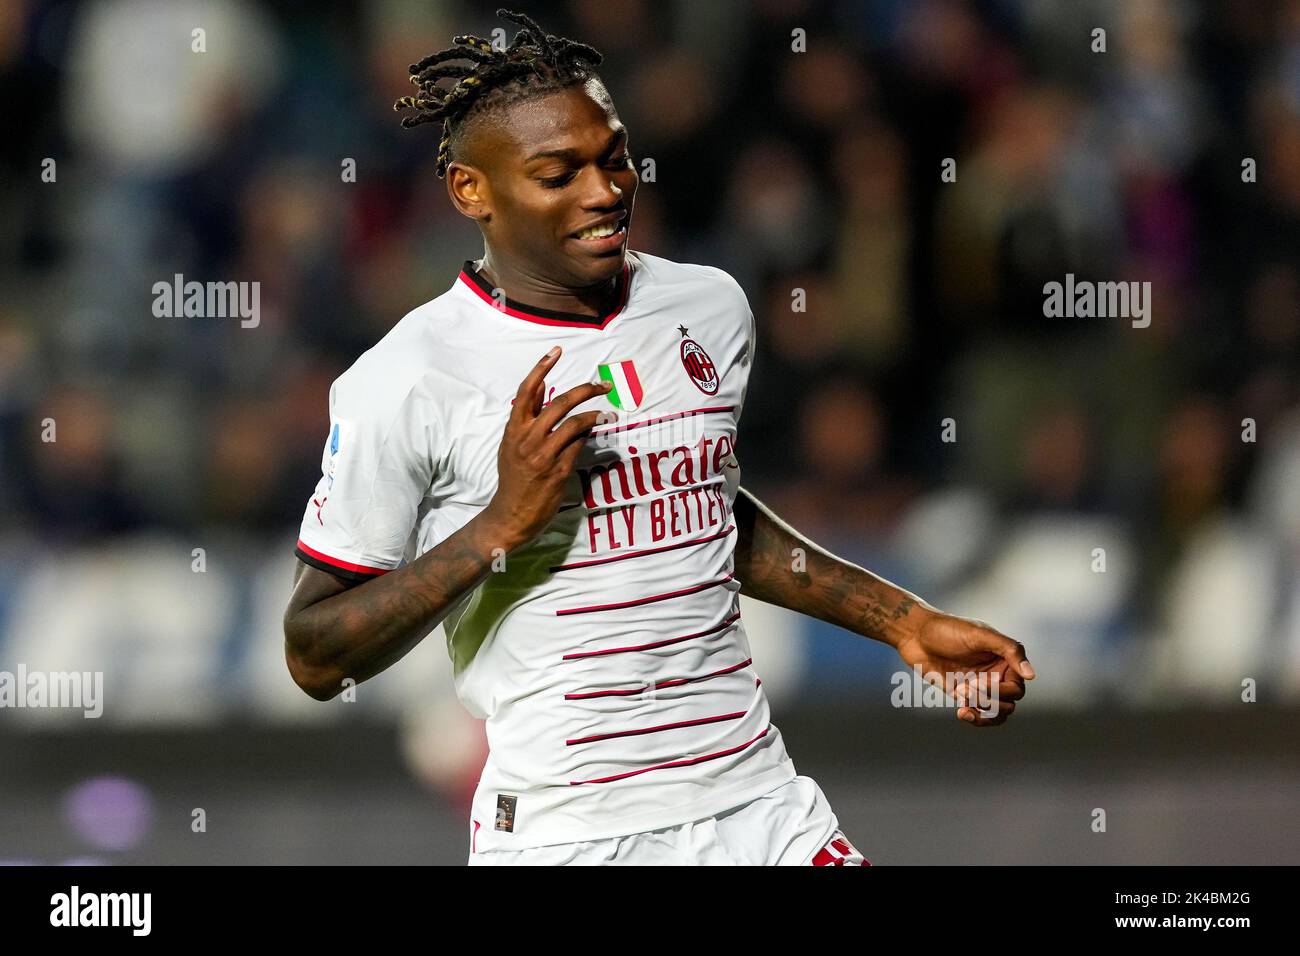 Empoli, Italy. 01st Oct, 2022. Rafael Leao of AC Milan celebrates after scoring the goal of 1-3 during the Serie A football match between Empoli FC and AC Milan at Carlo Castellani stadium in Empoli (Italy), October 1st, 2022. Photo Paolo Nucci/Insidefoto Credit: Insidefoto di andrea staccioli/Alamy Live News Stock Photo